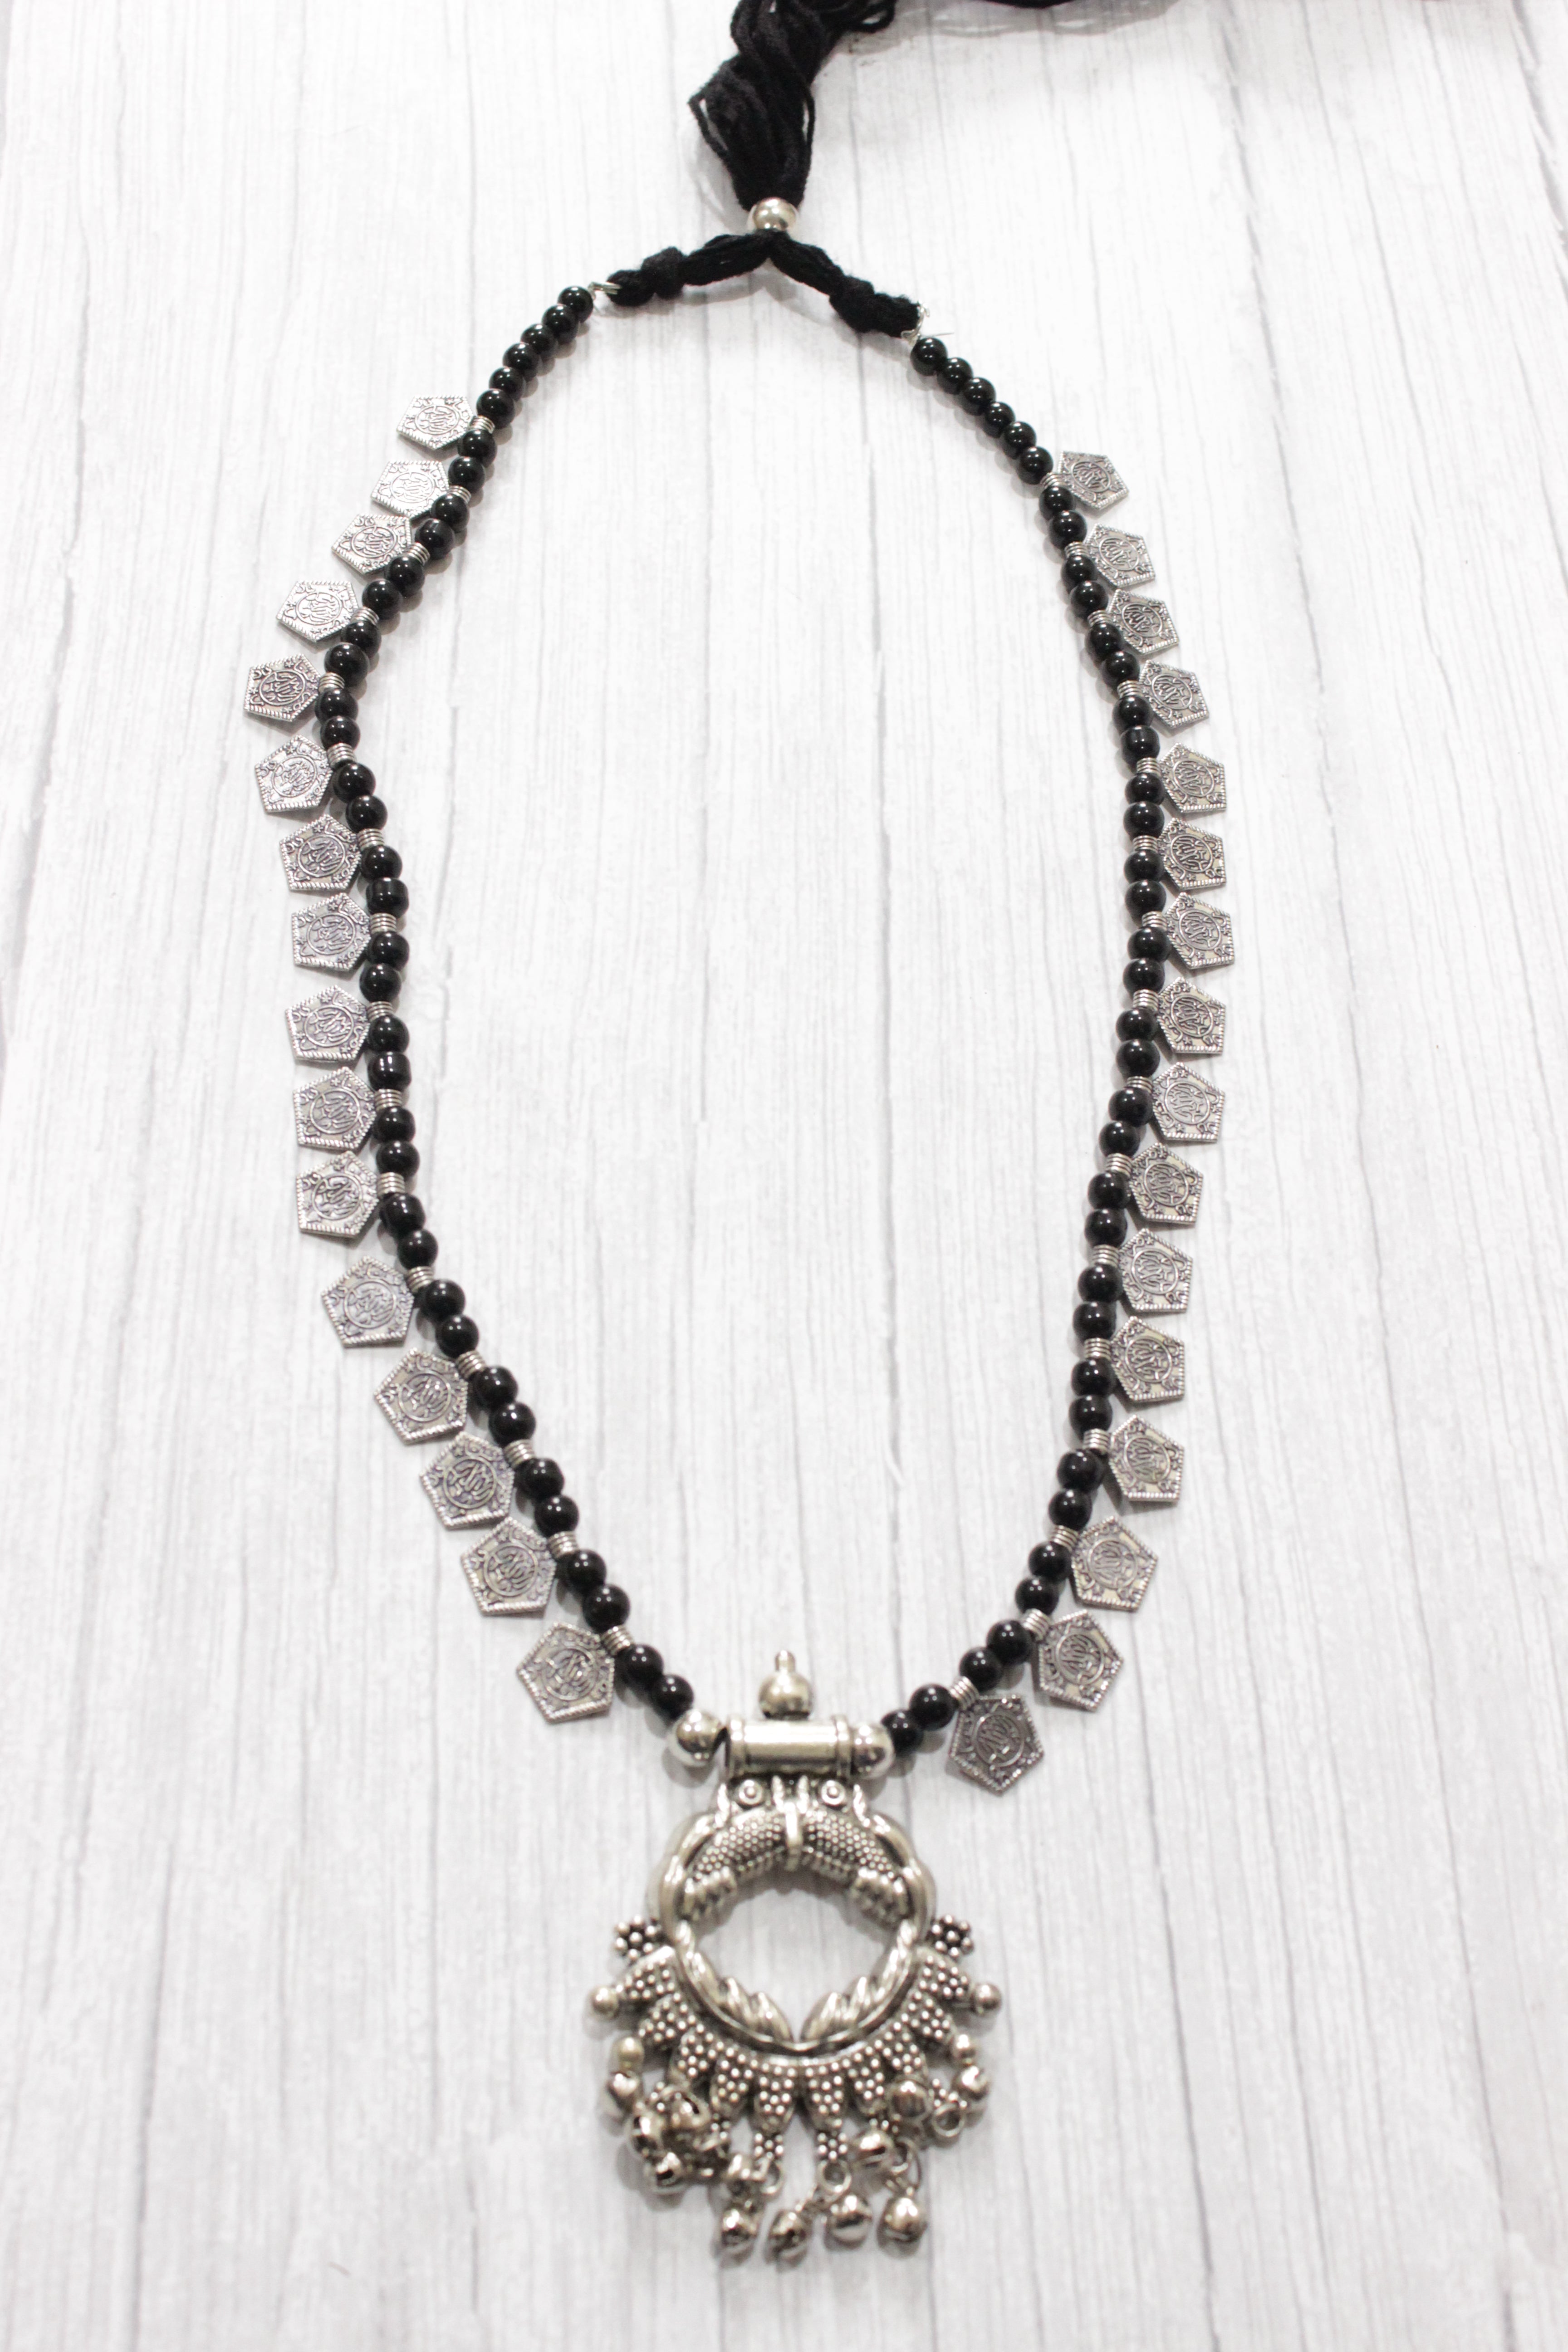 Braided Black Beads and Metal Charms Long Necklace Set